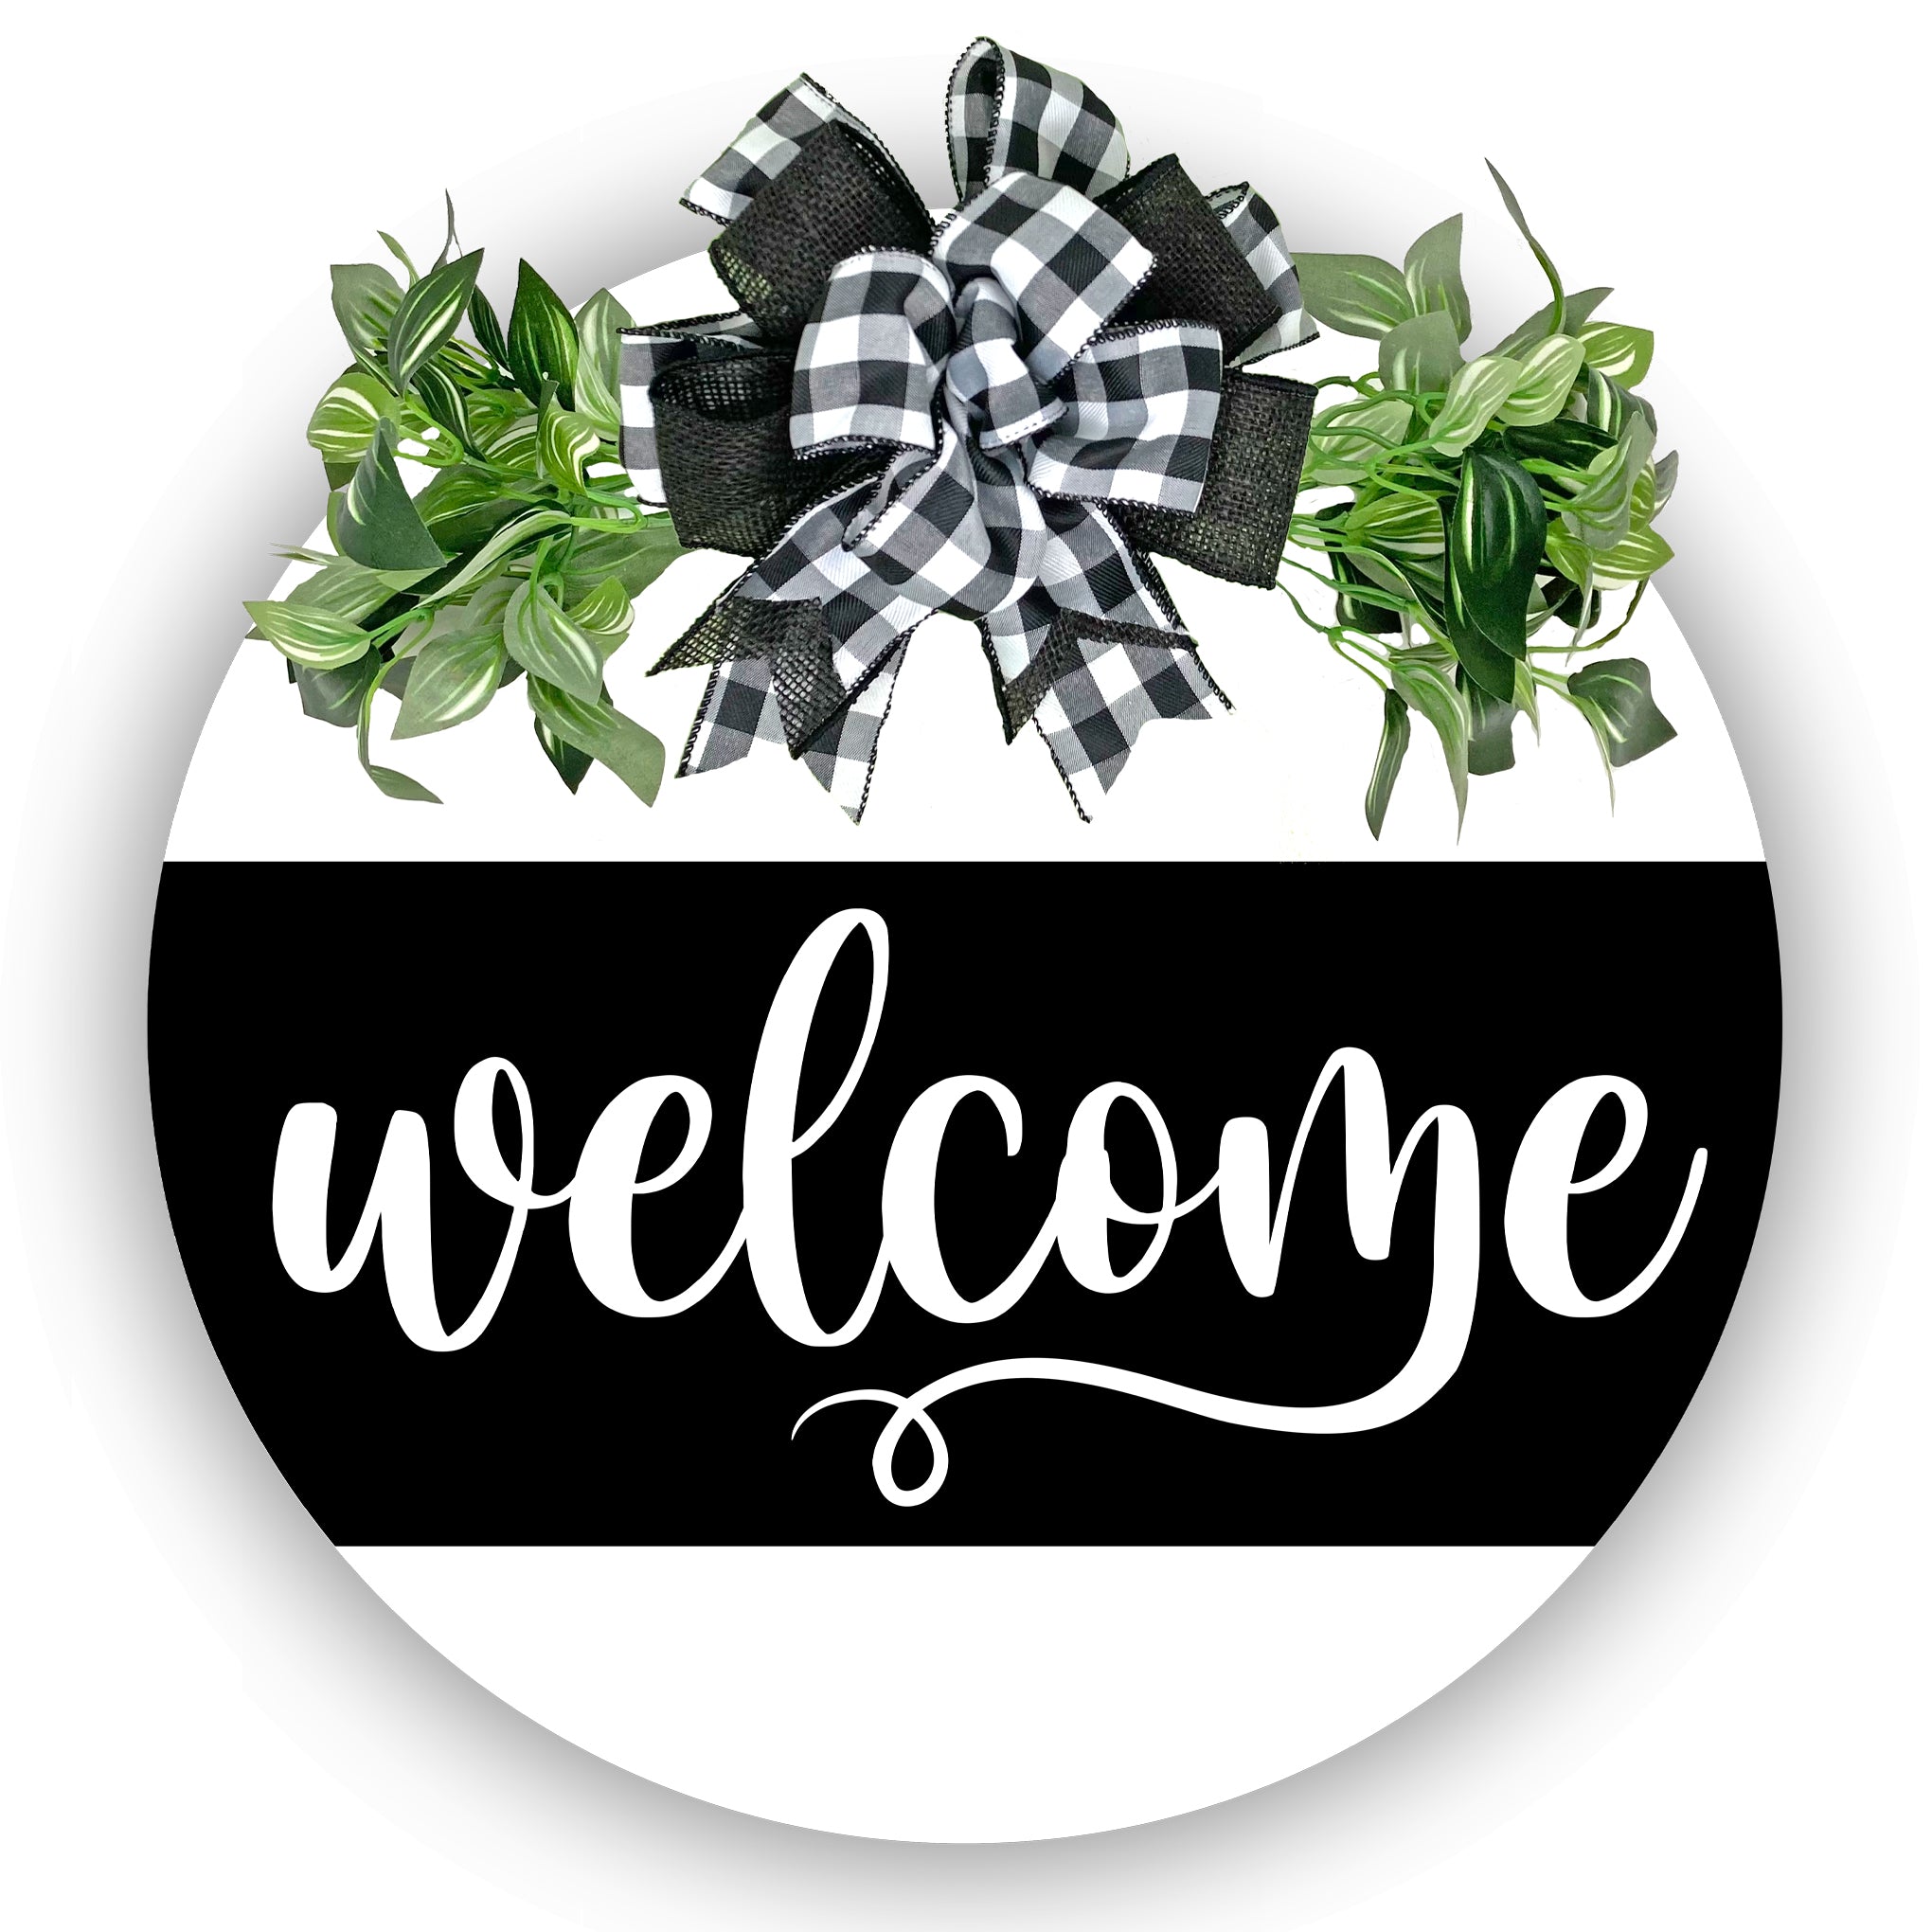 Painted 18 inch wood round door hanger.  white background with welcome text on a large black stripe.  black and white plaid bow with greenery.